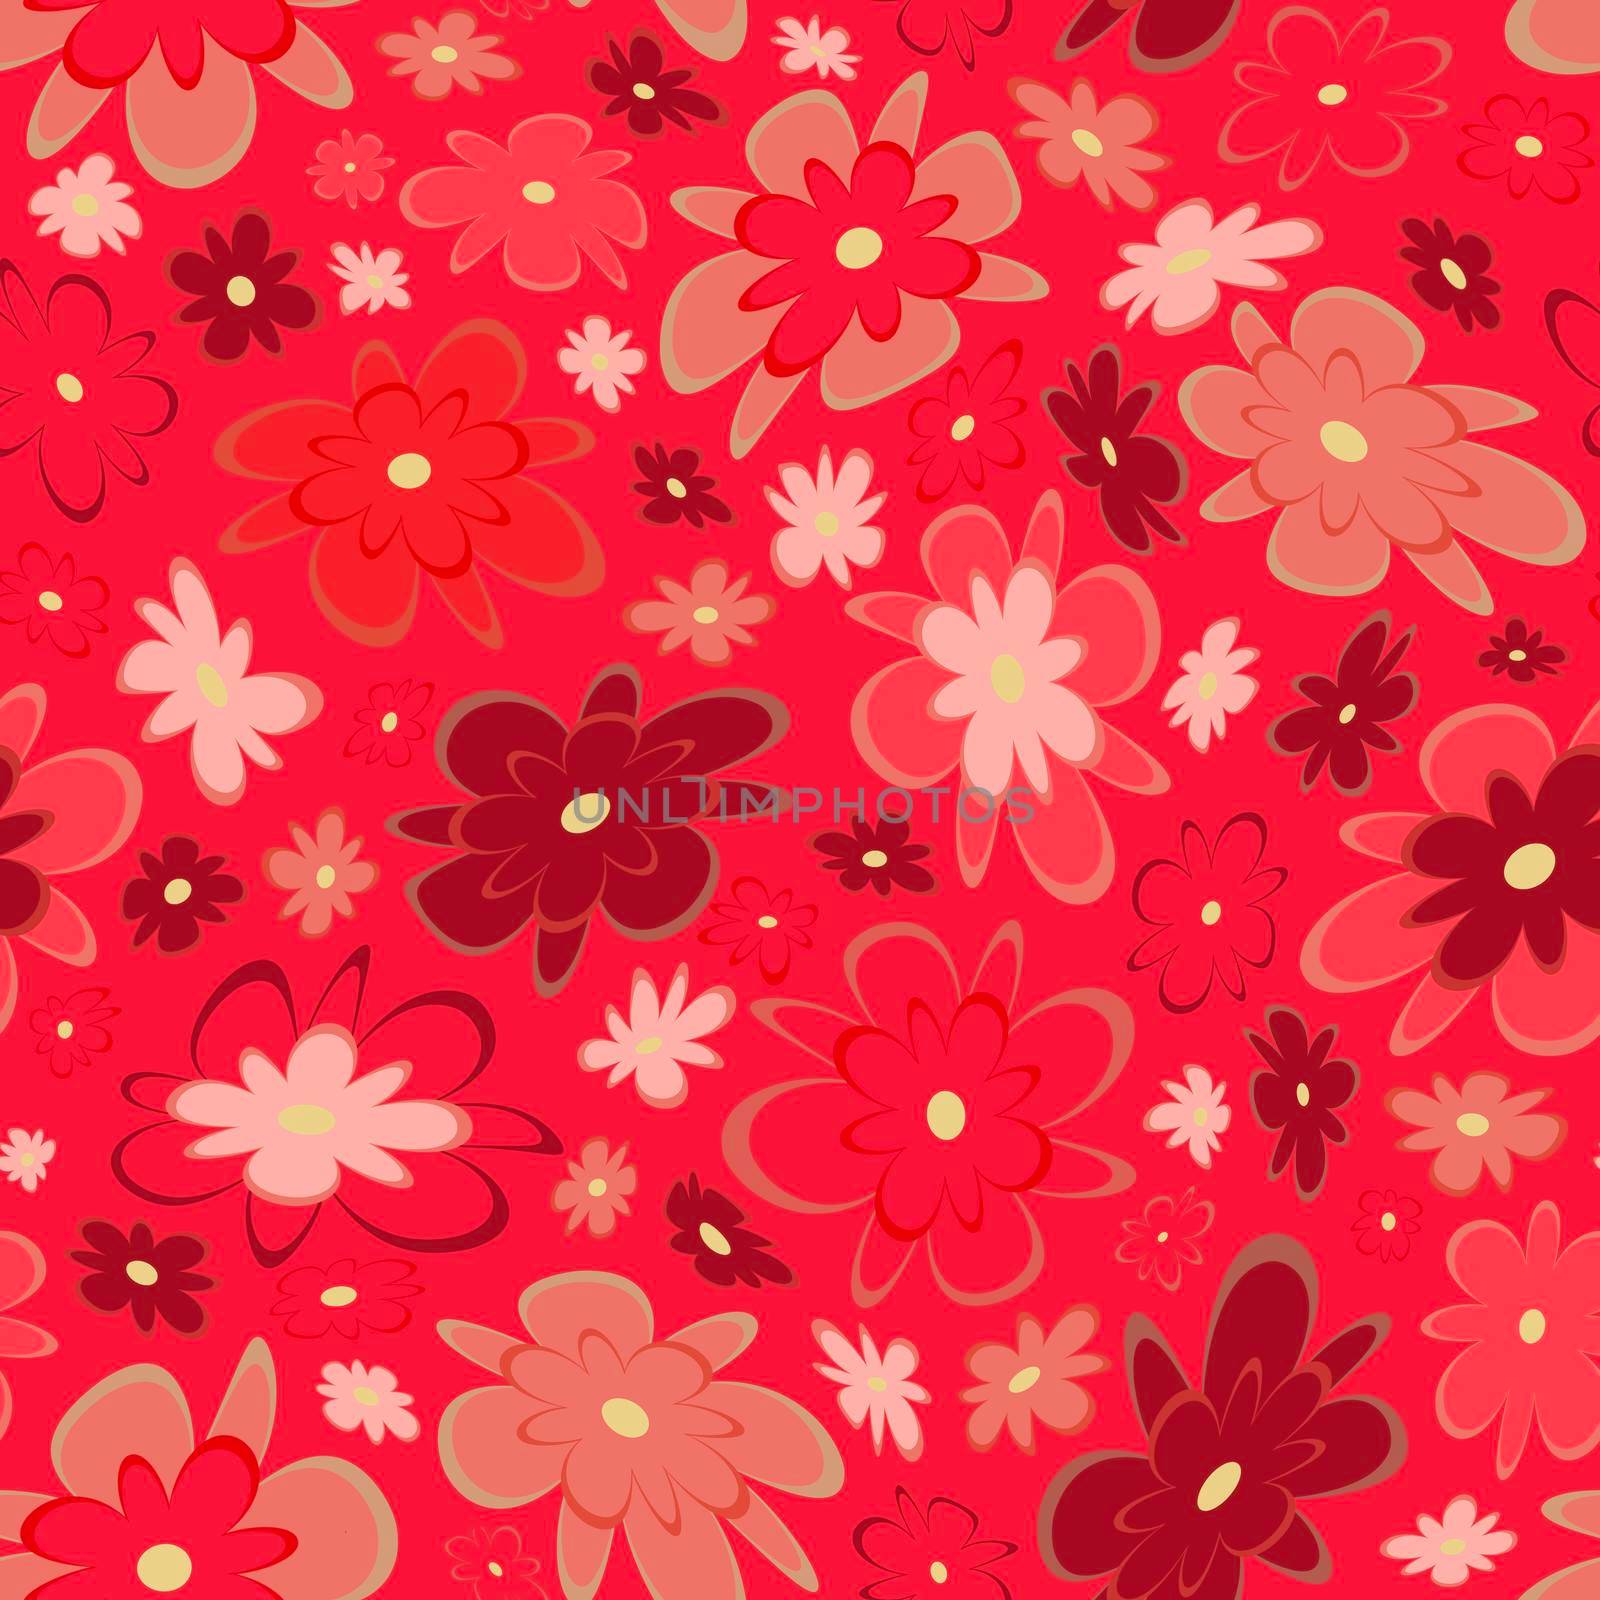 Trendy fabric pattern with miniature flowers.Summer print.Fashion design.Motifs scattered random.Elegant template for fashion prints.Good for fashion,textile,fabric,gift wrapping paper.Pink on coral by Angelsmoon